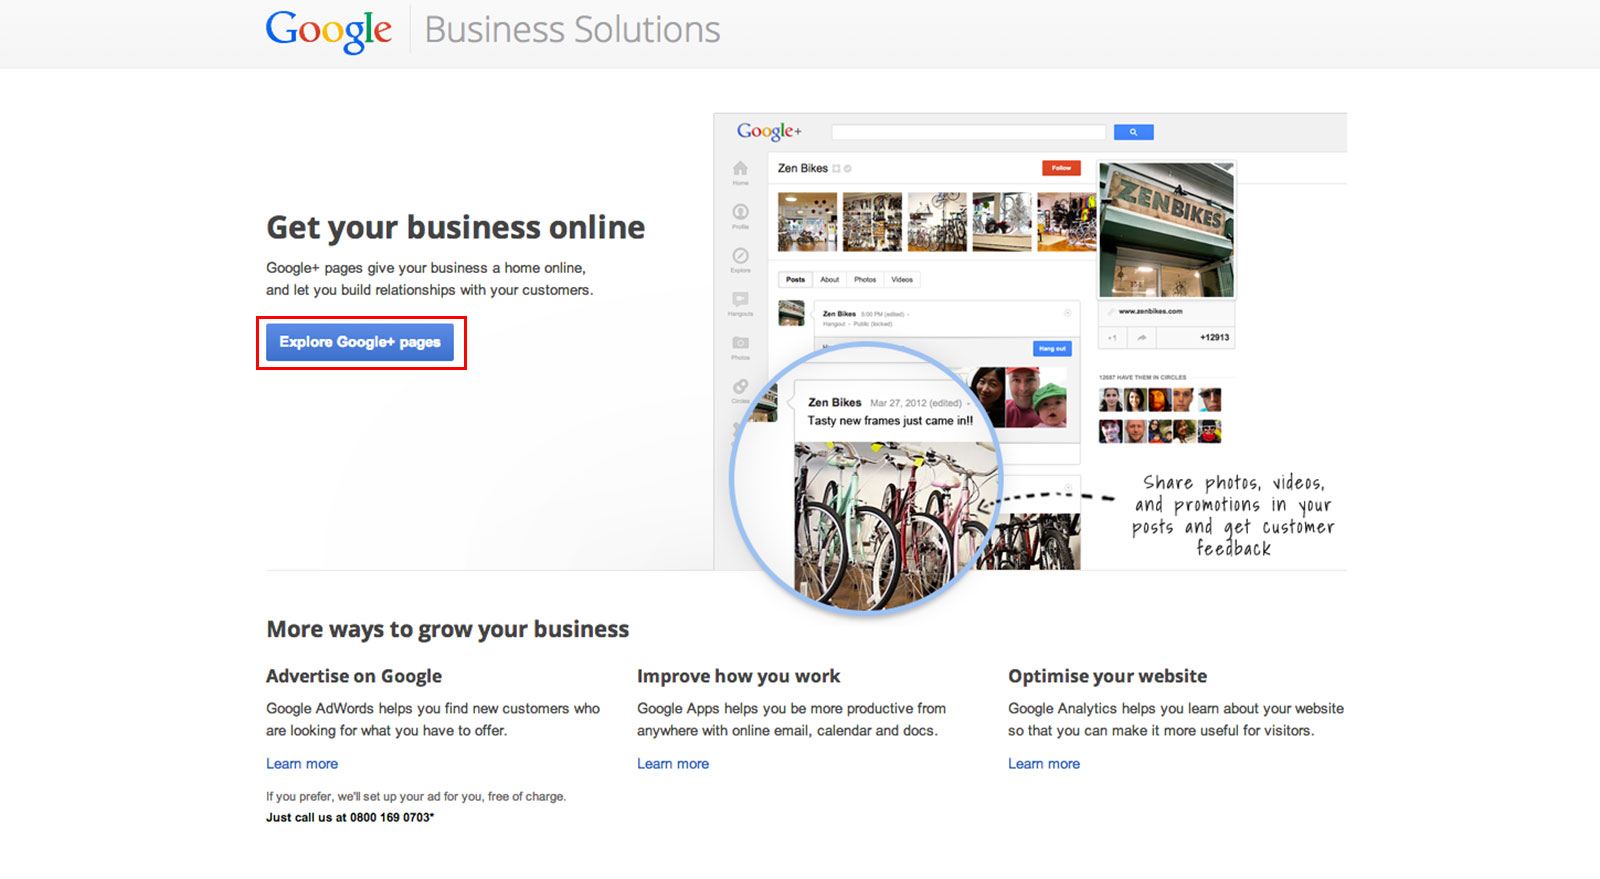 creating a Google Plus profile for a business